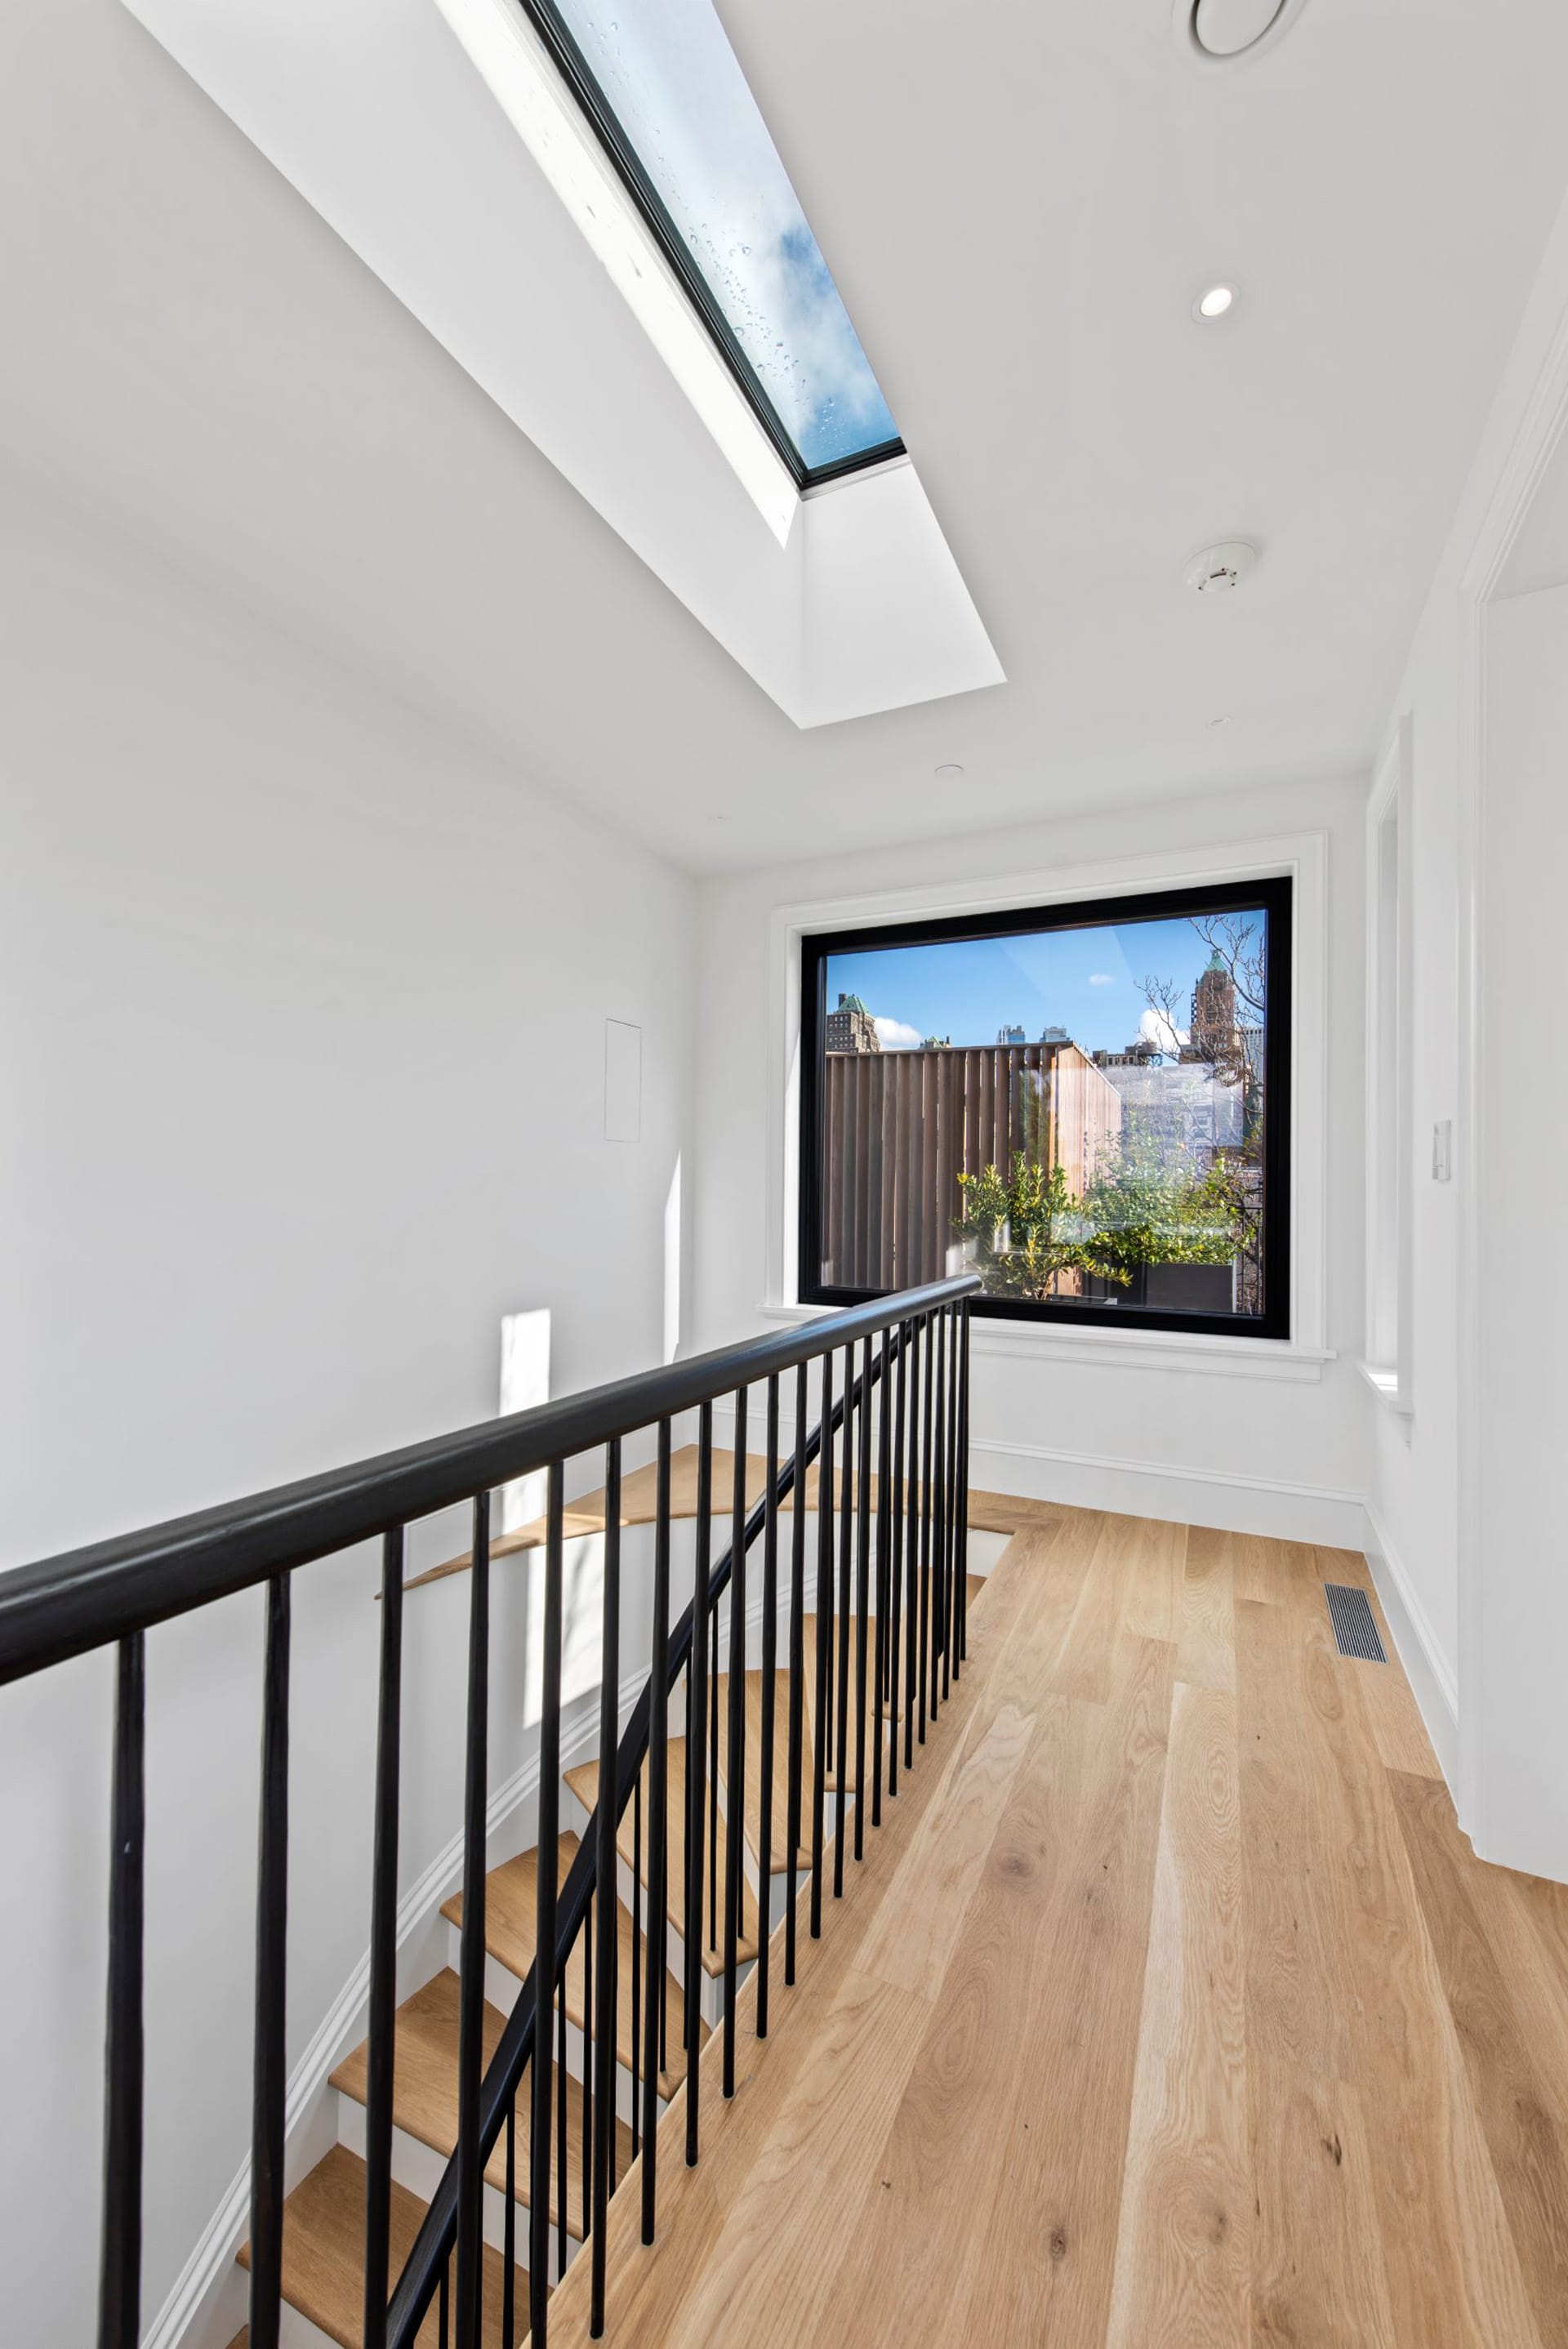 Fifth floor landing of a five-story townhouse with a large skylight above the staircase, and a large window at the landing. The floors are white oak and the walls are painted white.